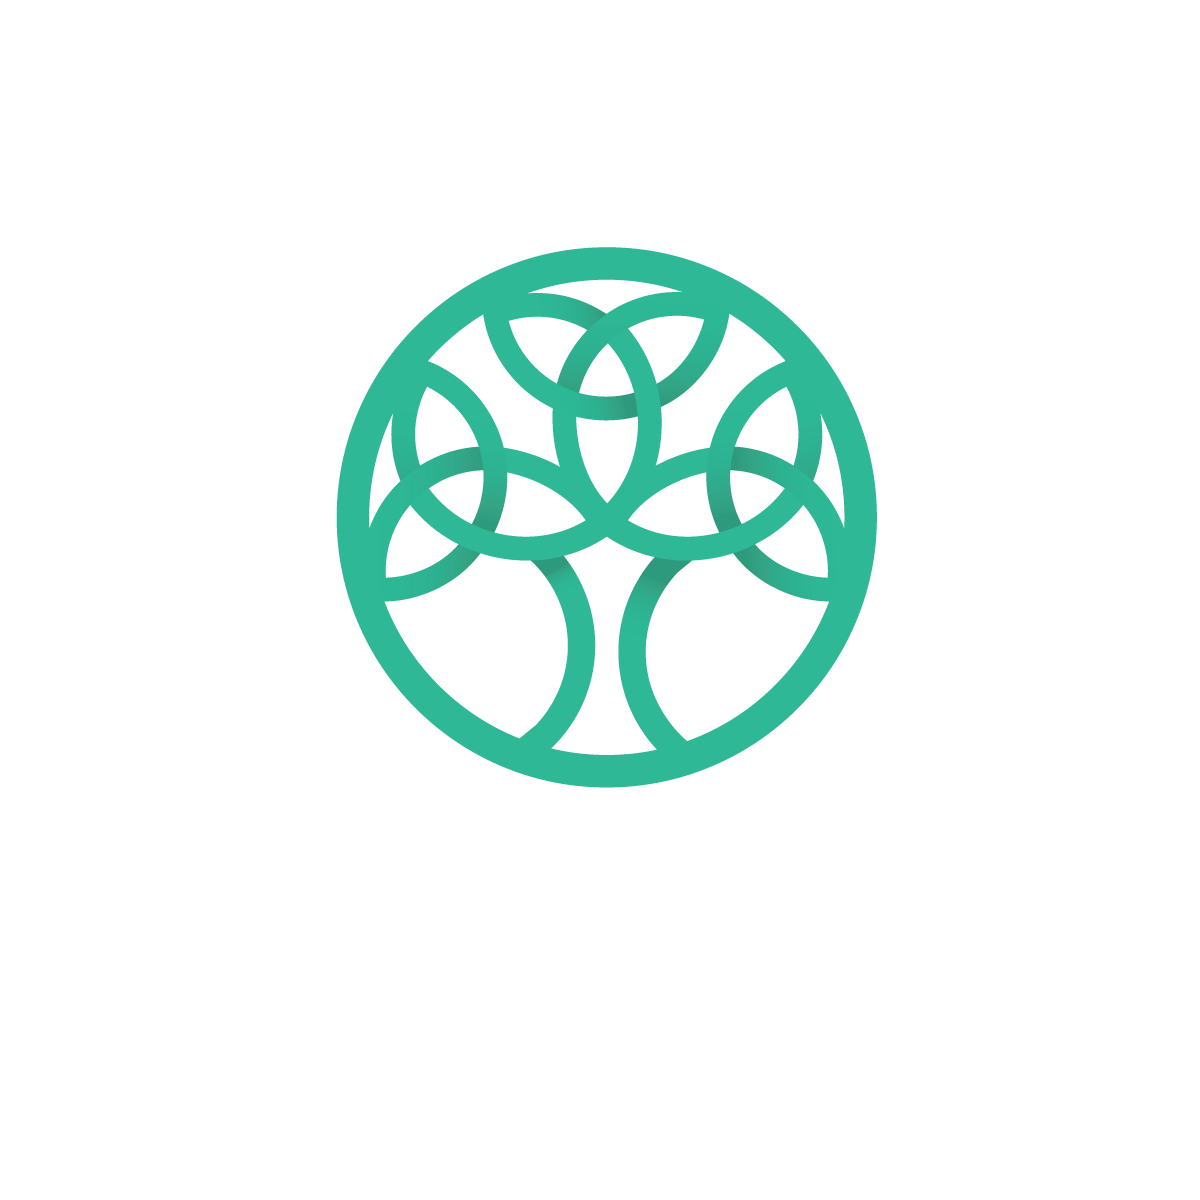 Reverie Counseling